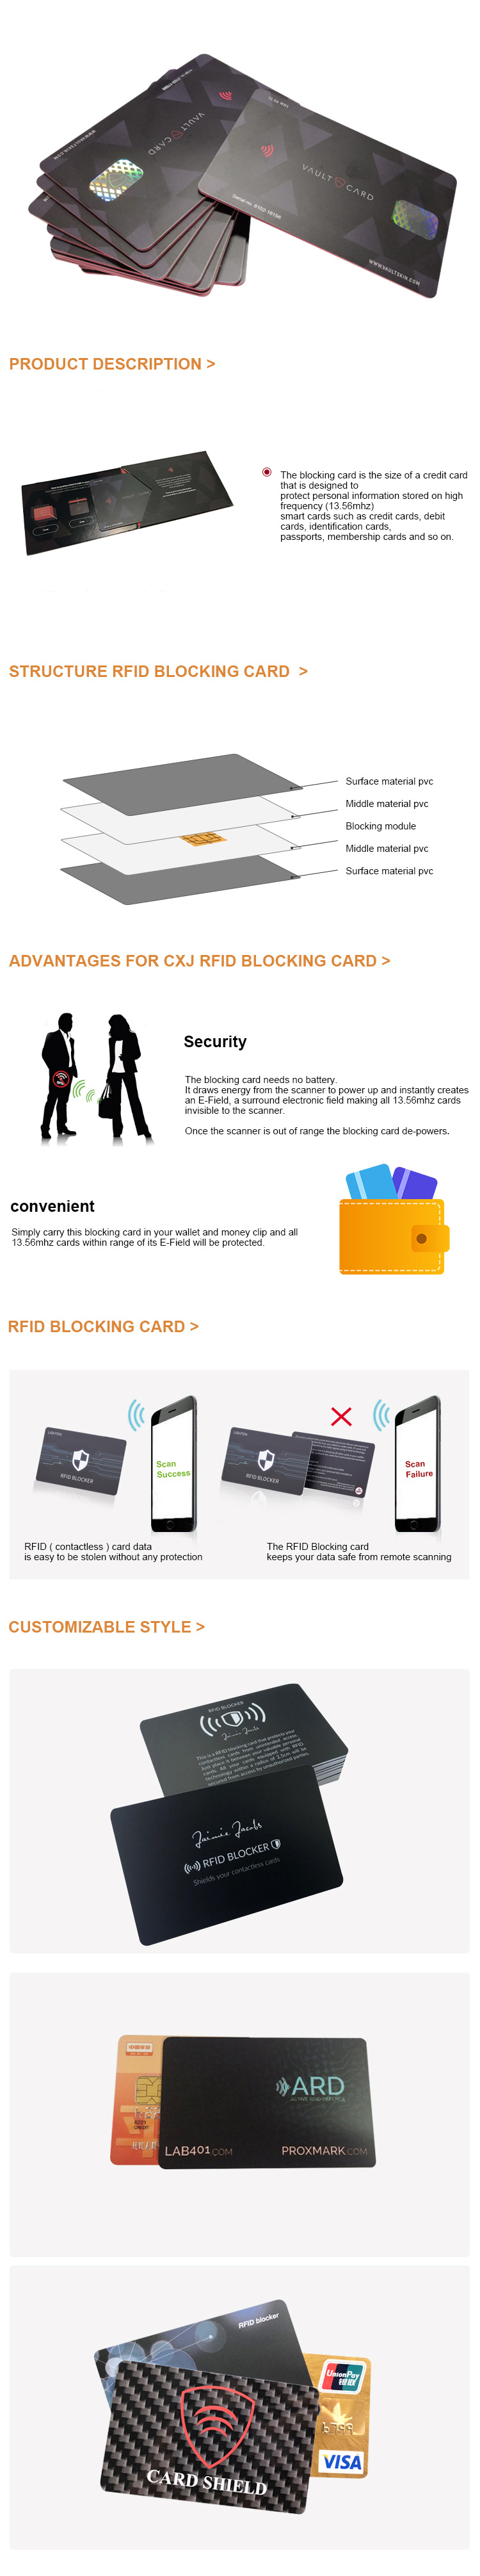 Printing PVC RFID Blocking Card for Protecting Identity Theft